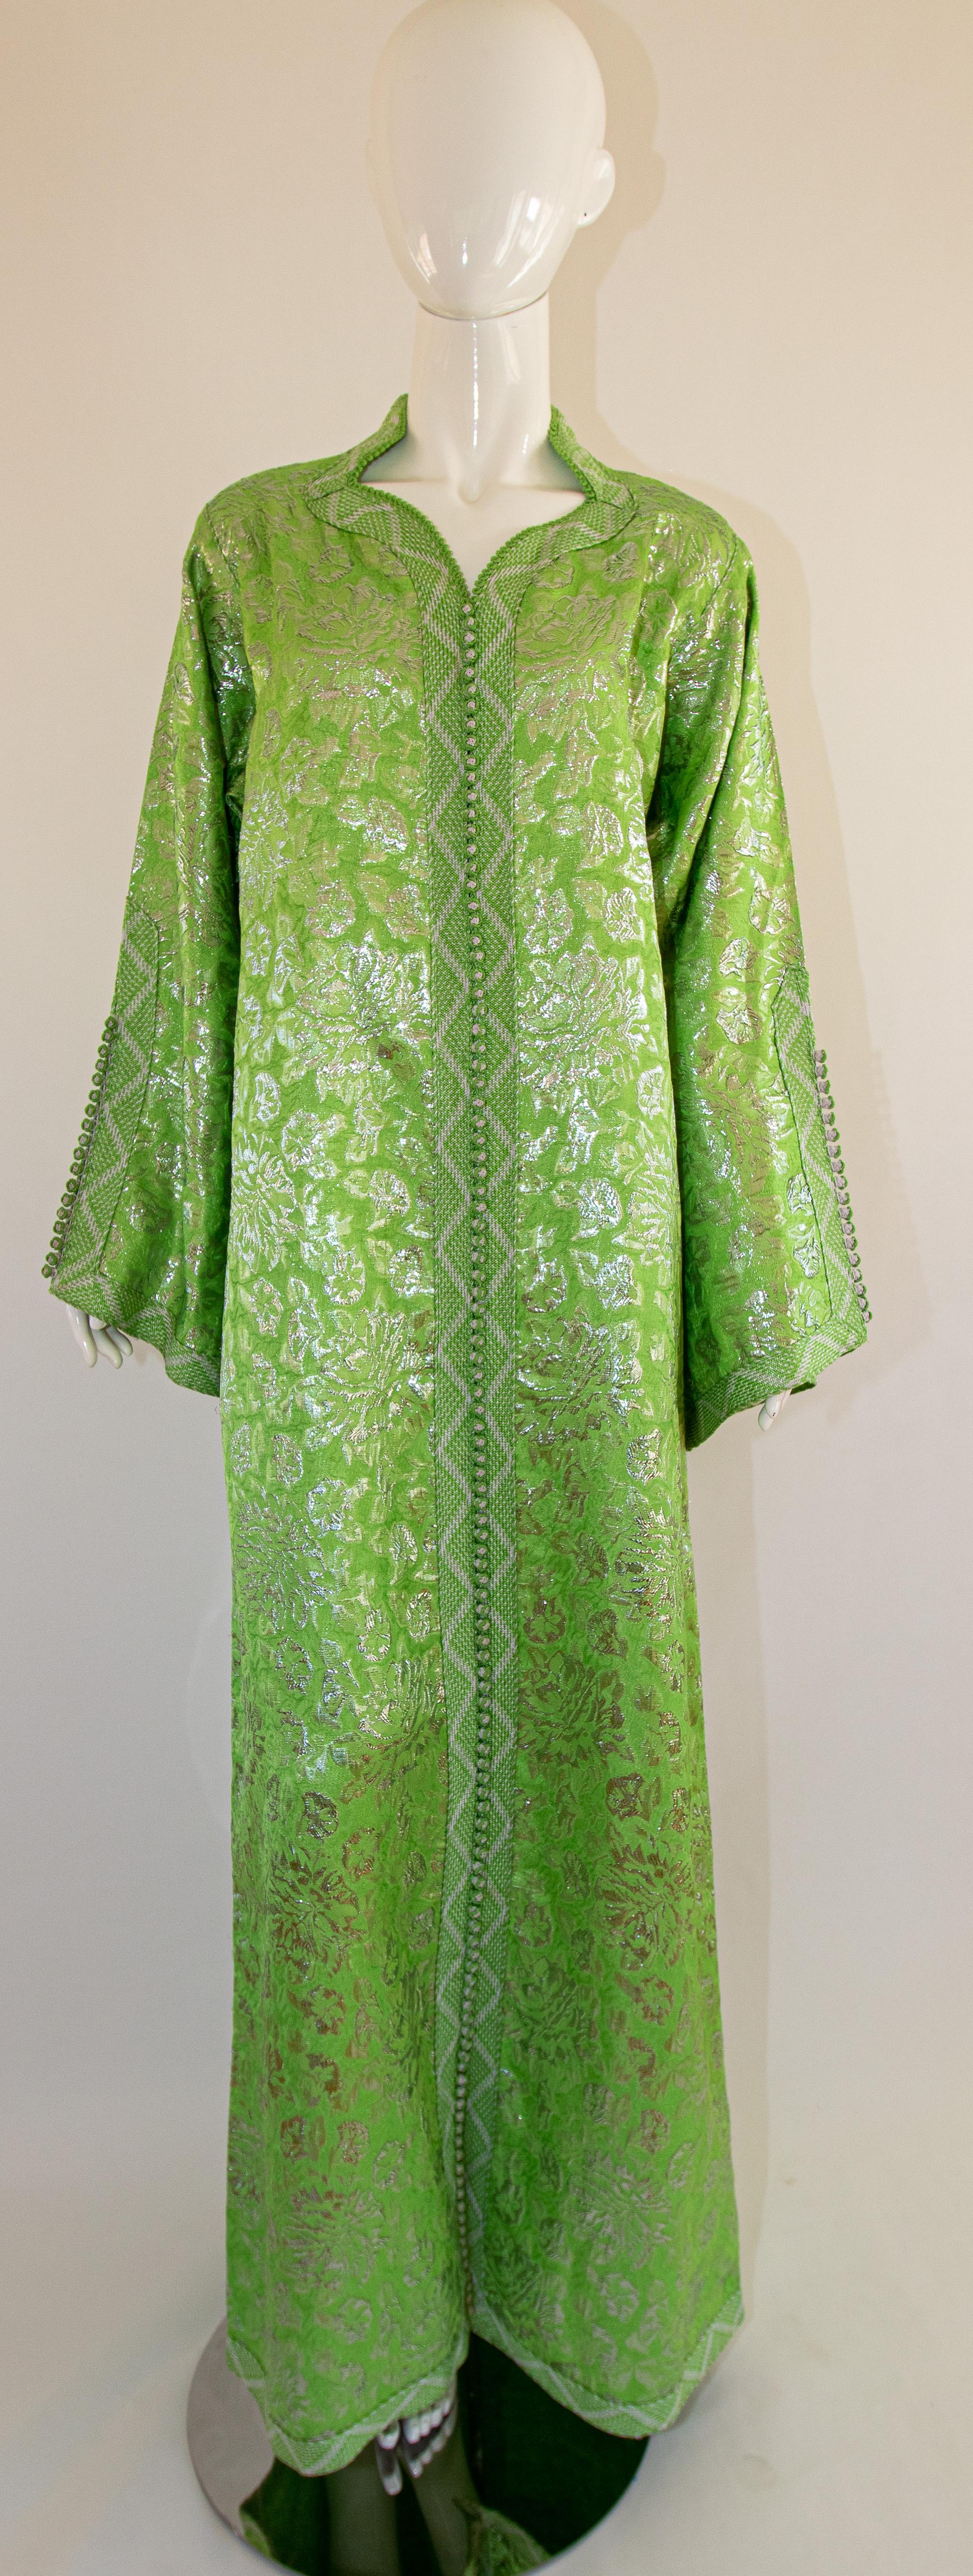 Elegant Moroccan caftan lime green and silver lame metallic brocade,
This is an exceptional example of Moroccan fashion design dating to the 1970s, 
Handcrafted in Morocco and tailored for a relaxed fit with wide sleeves, It is made in the